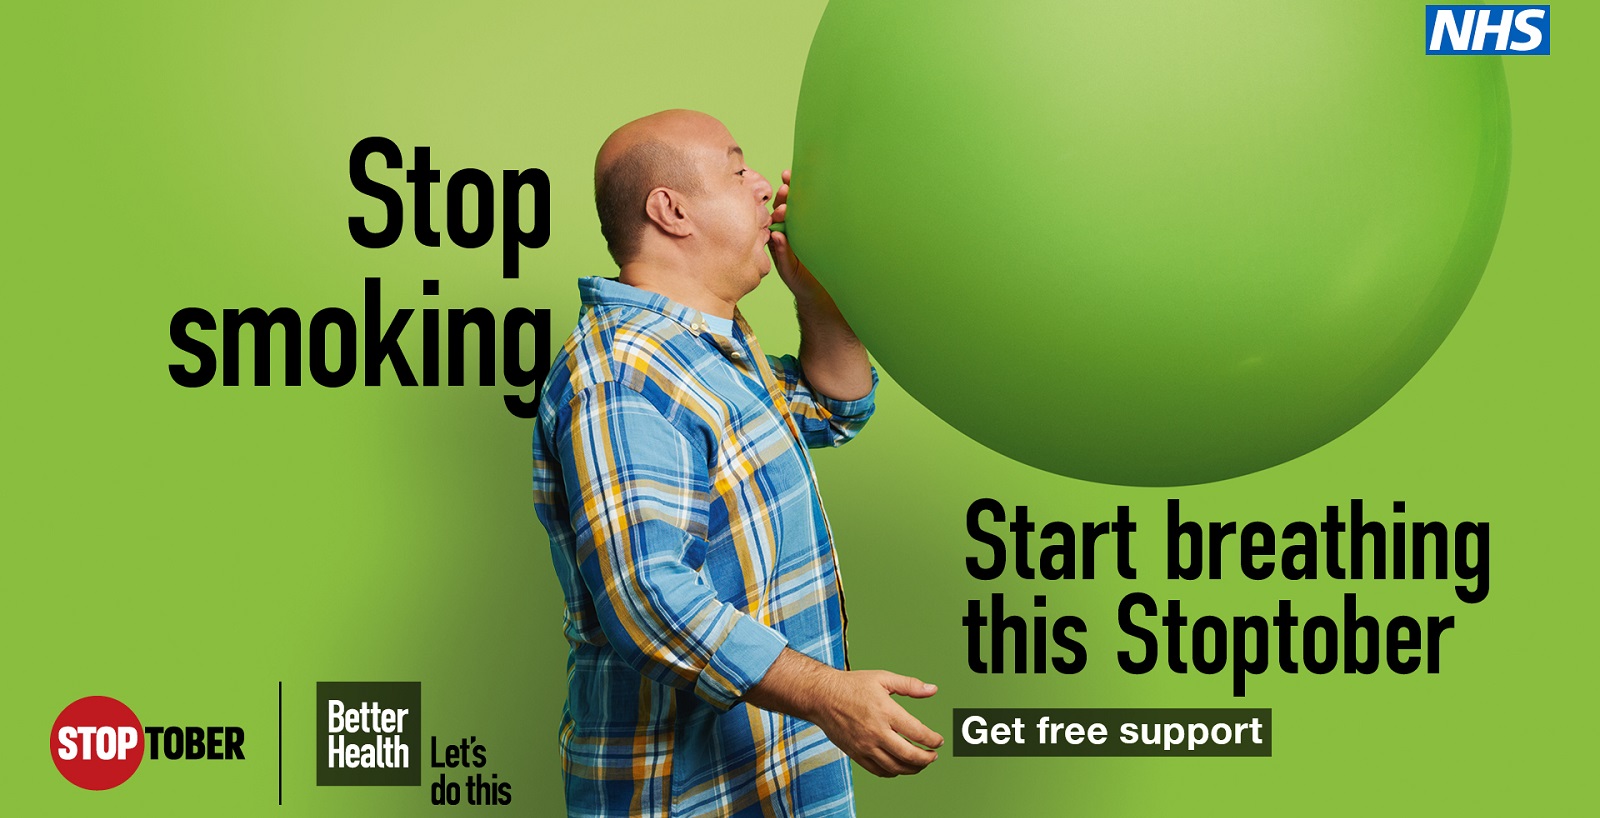 Smokers who reported smoking more in pandemic are encouraged to stop in Stoptober 